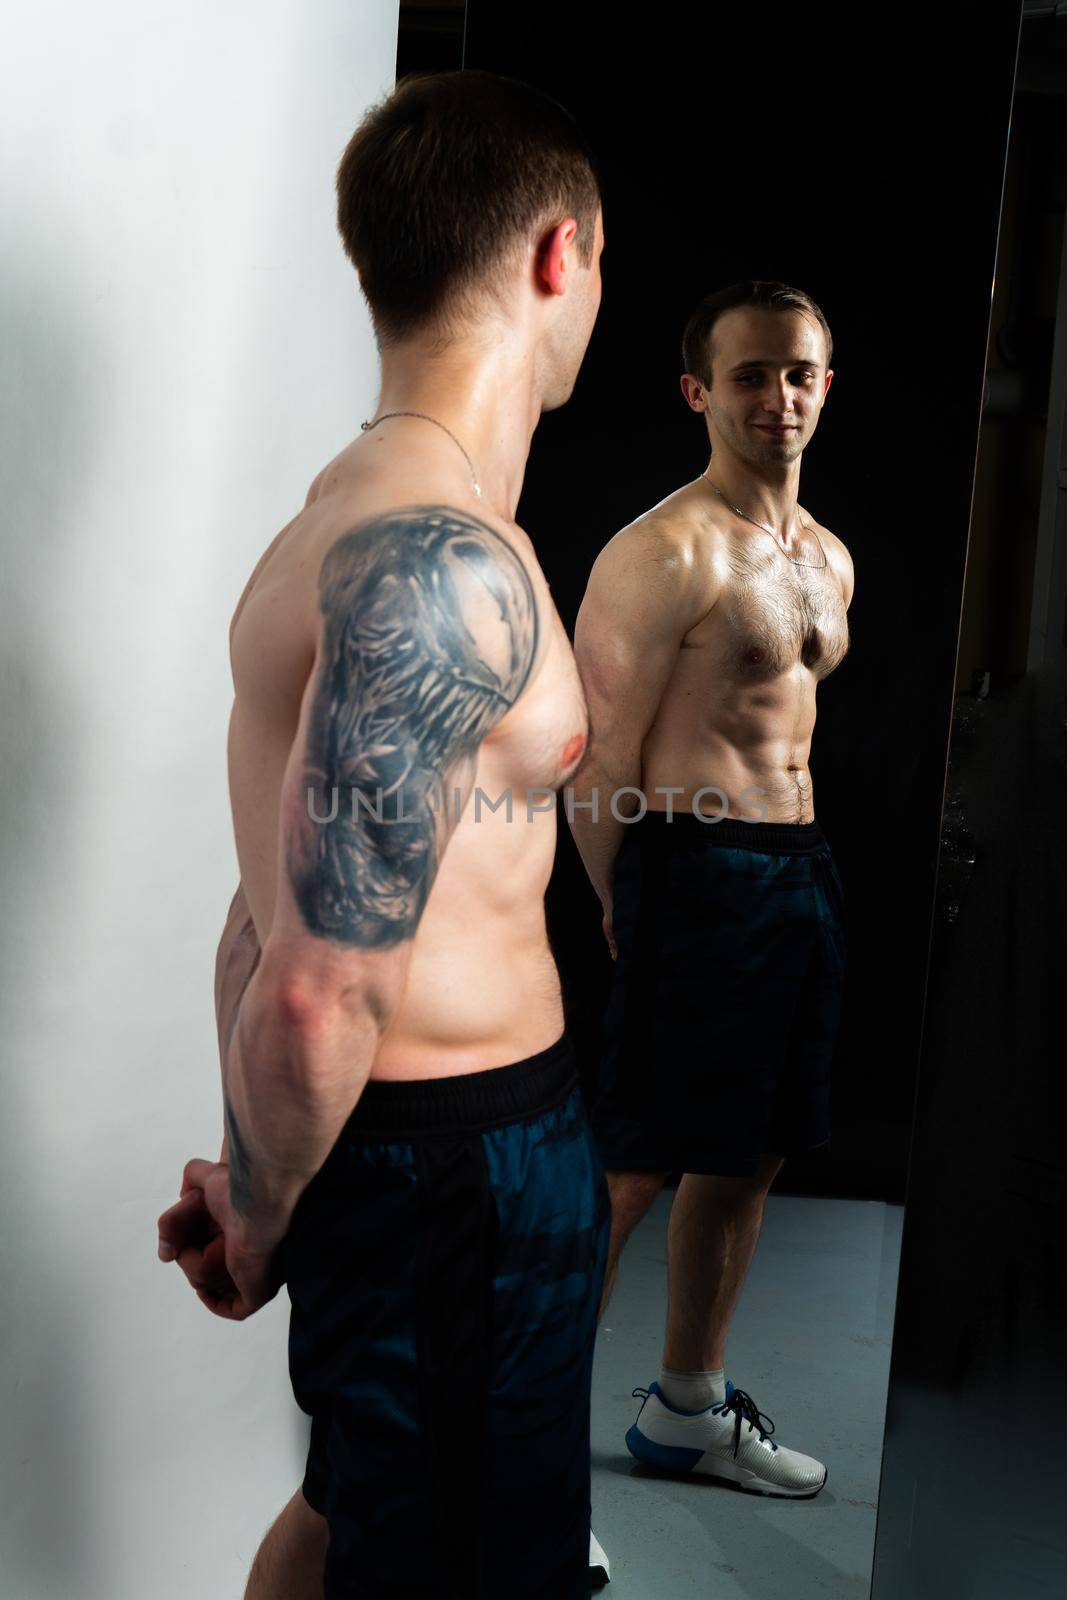 Man on black background keeps dumbbells pumped up in fitness bodybuilding training hand, shirtless lifestyle. Lift sportive human fit In mirror reflection, the body is pumped up